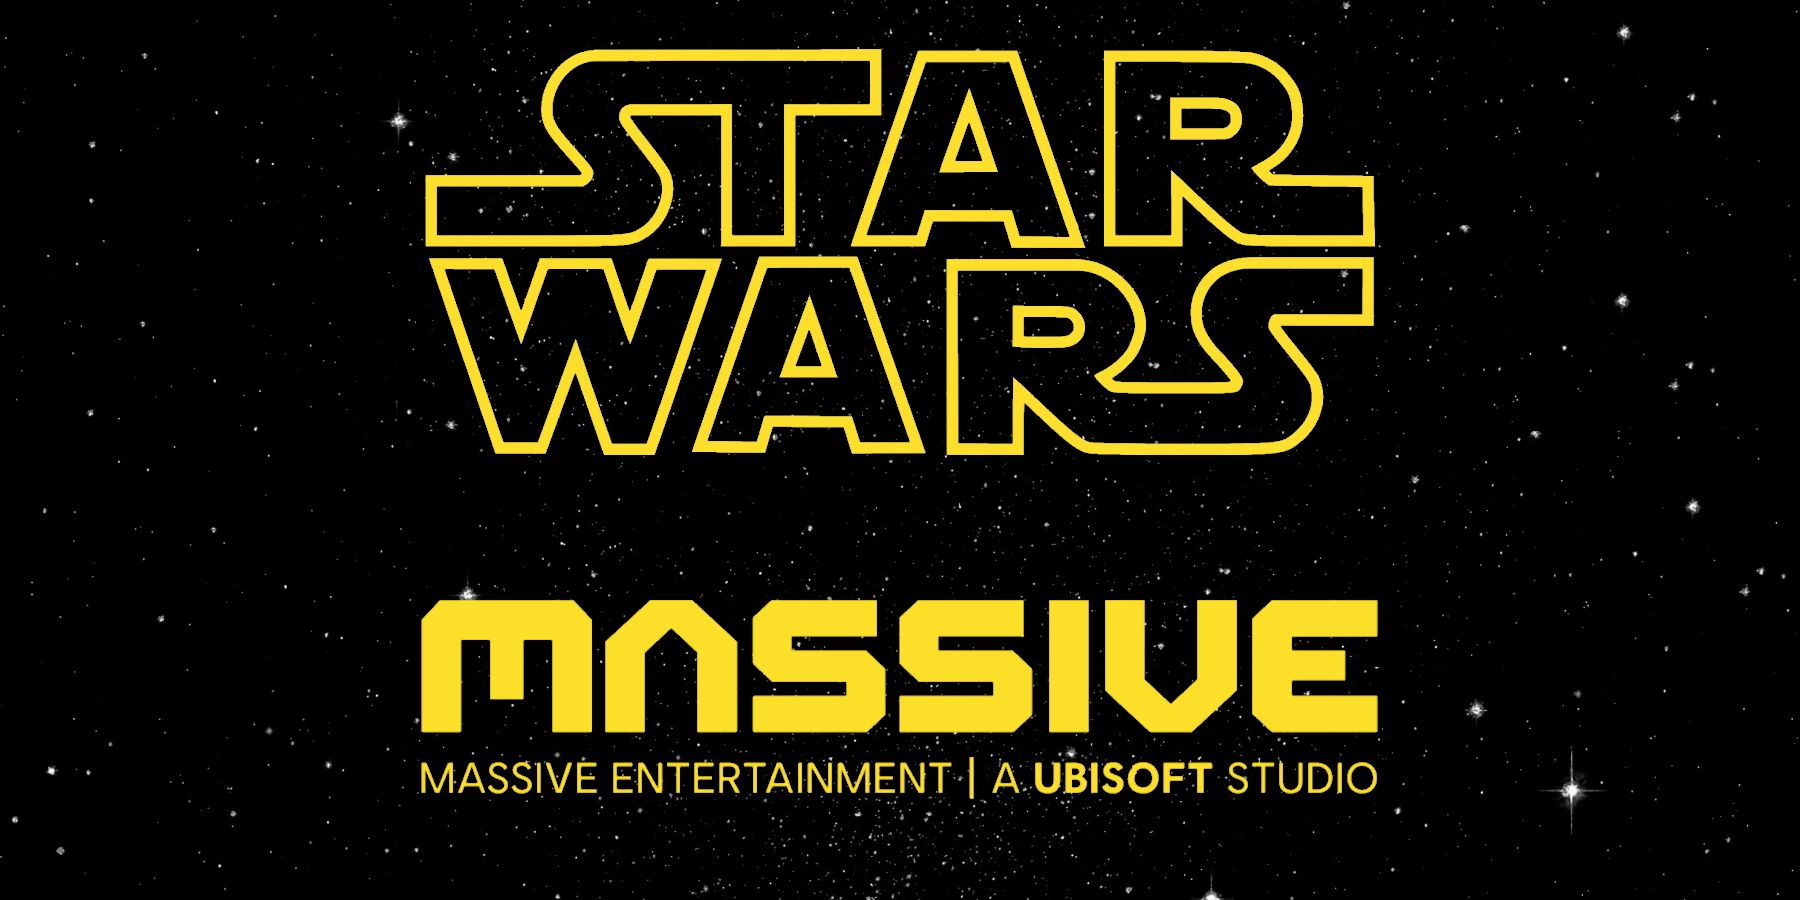 Logos for Star Wars and Massive Entertainment